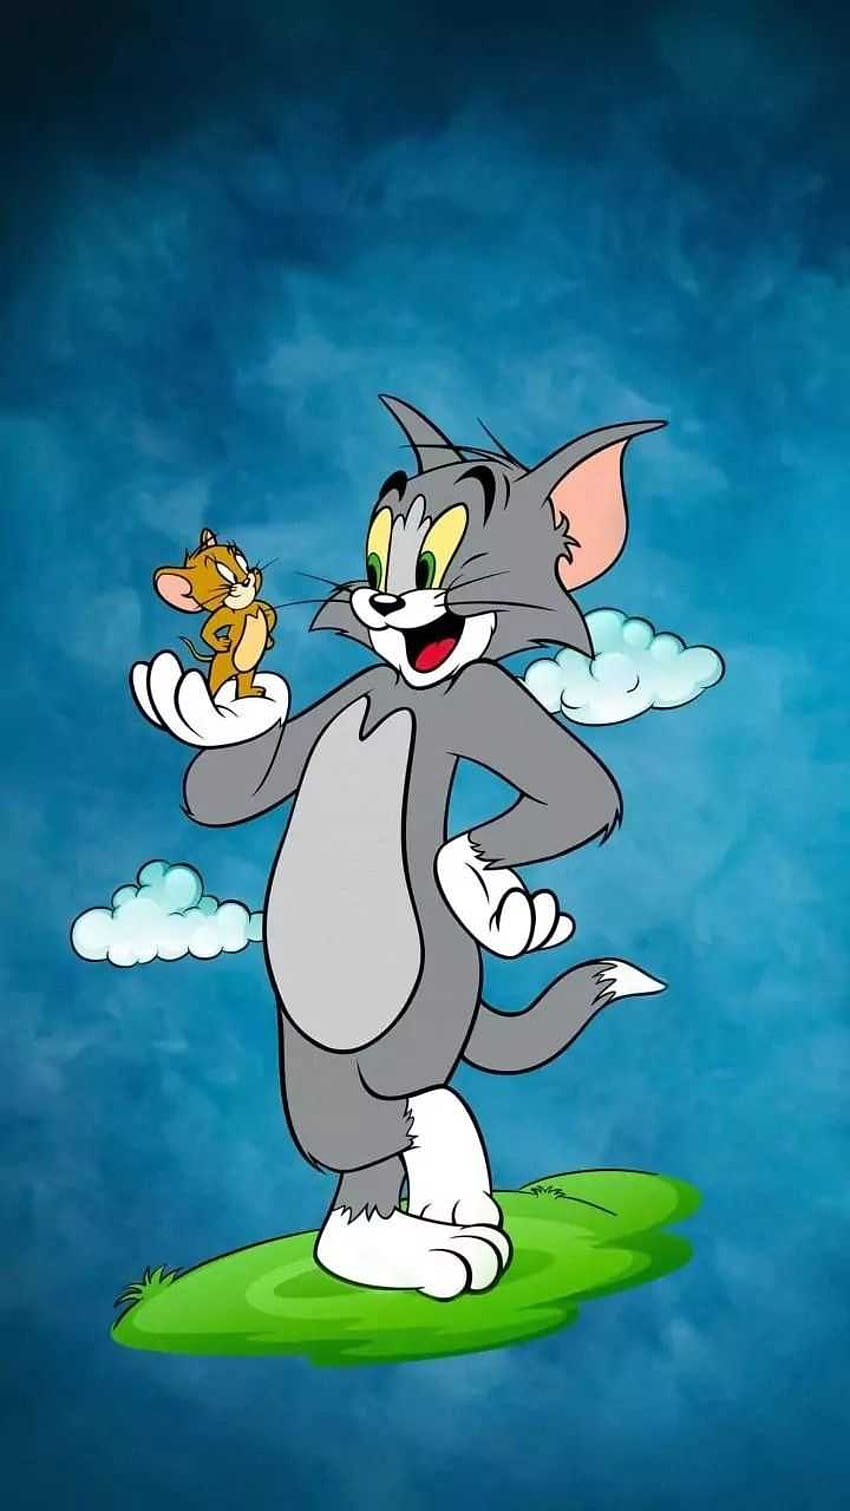 Tom and Jerry Wallpaper  Tom and jerry cartoon Cartoon wallpaper Tom and  jerry